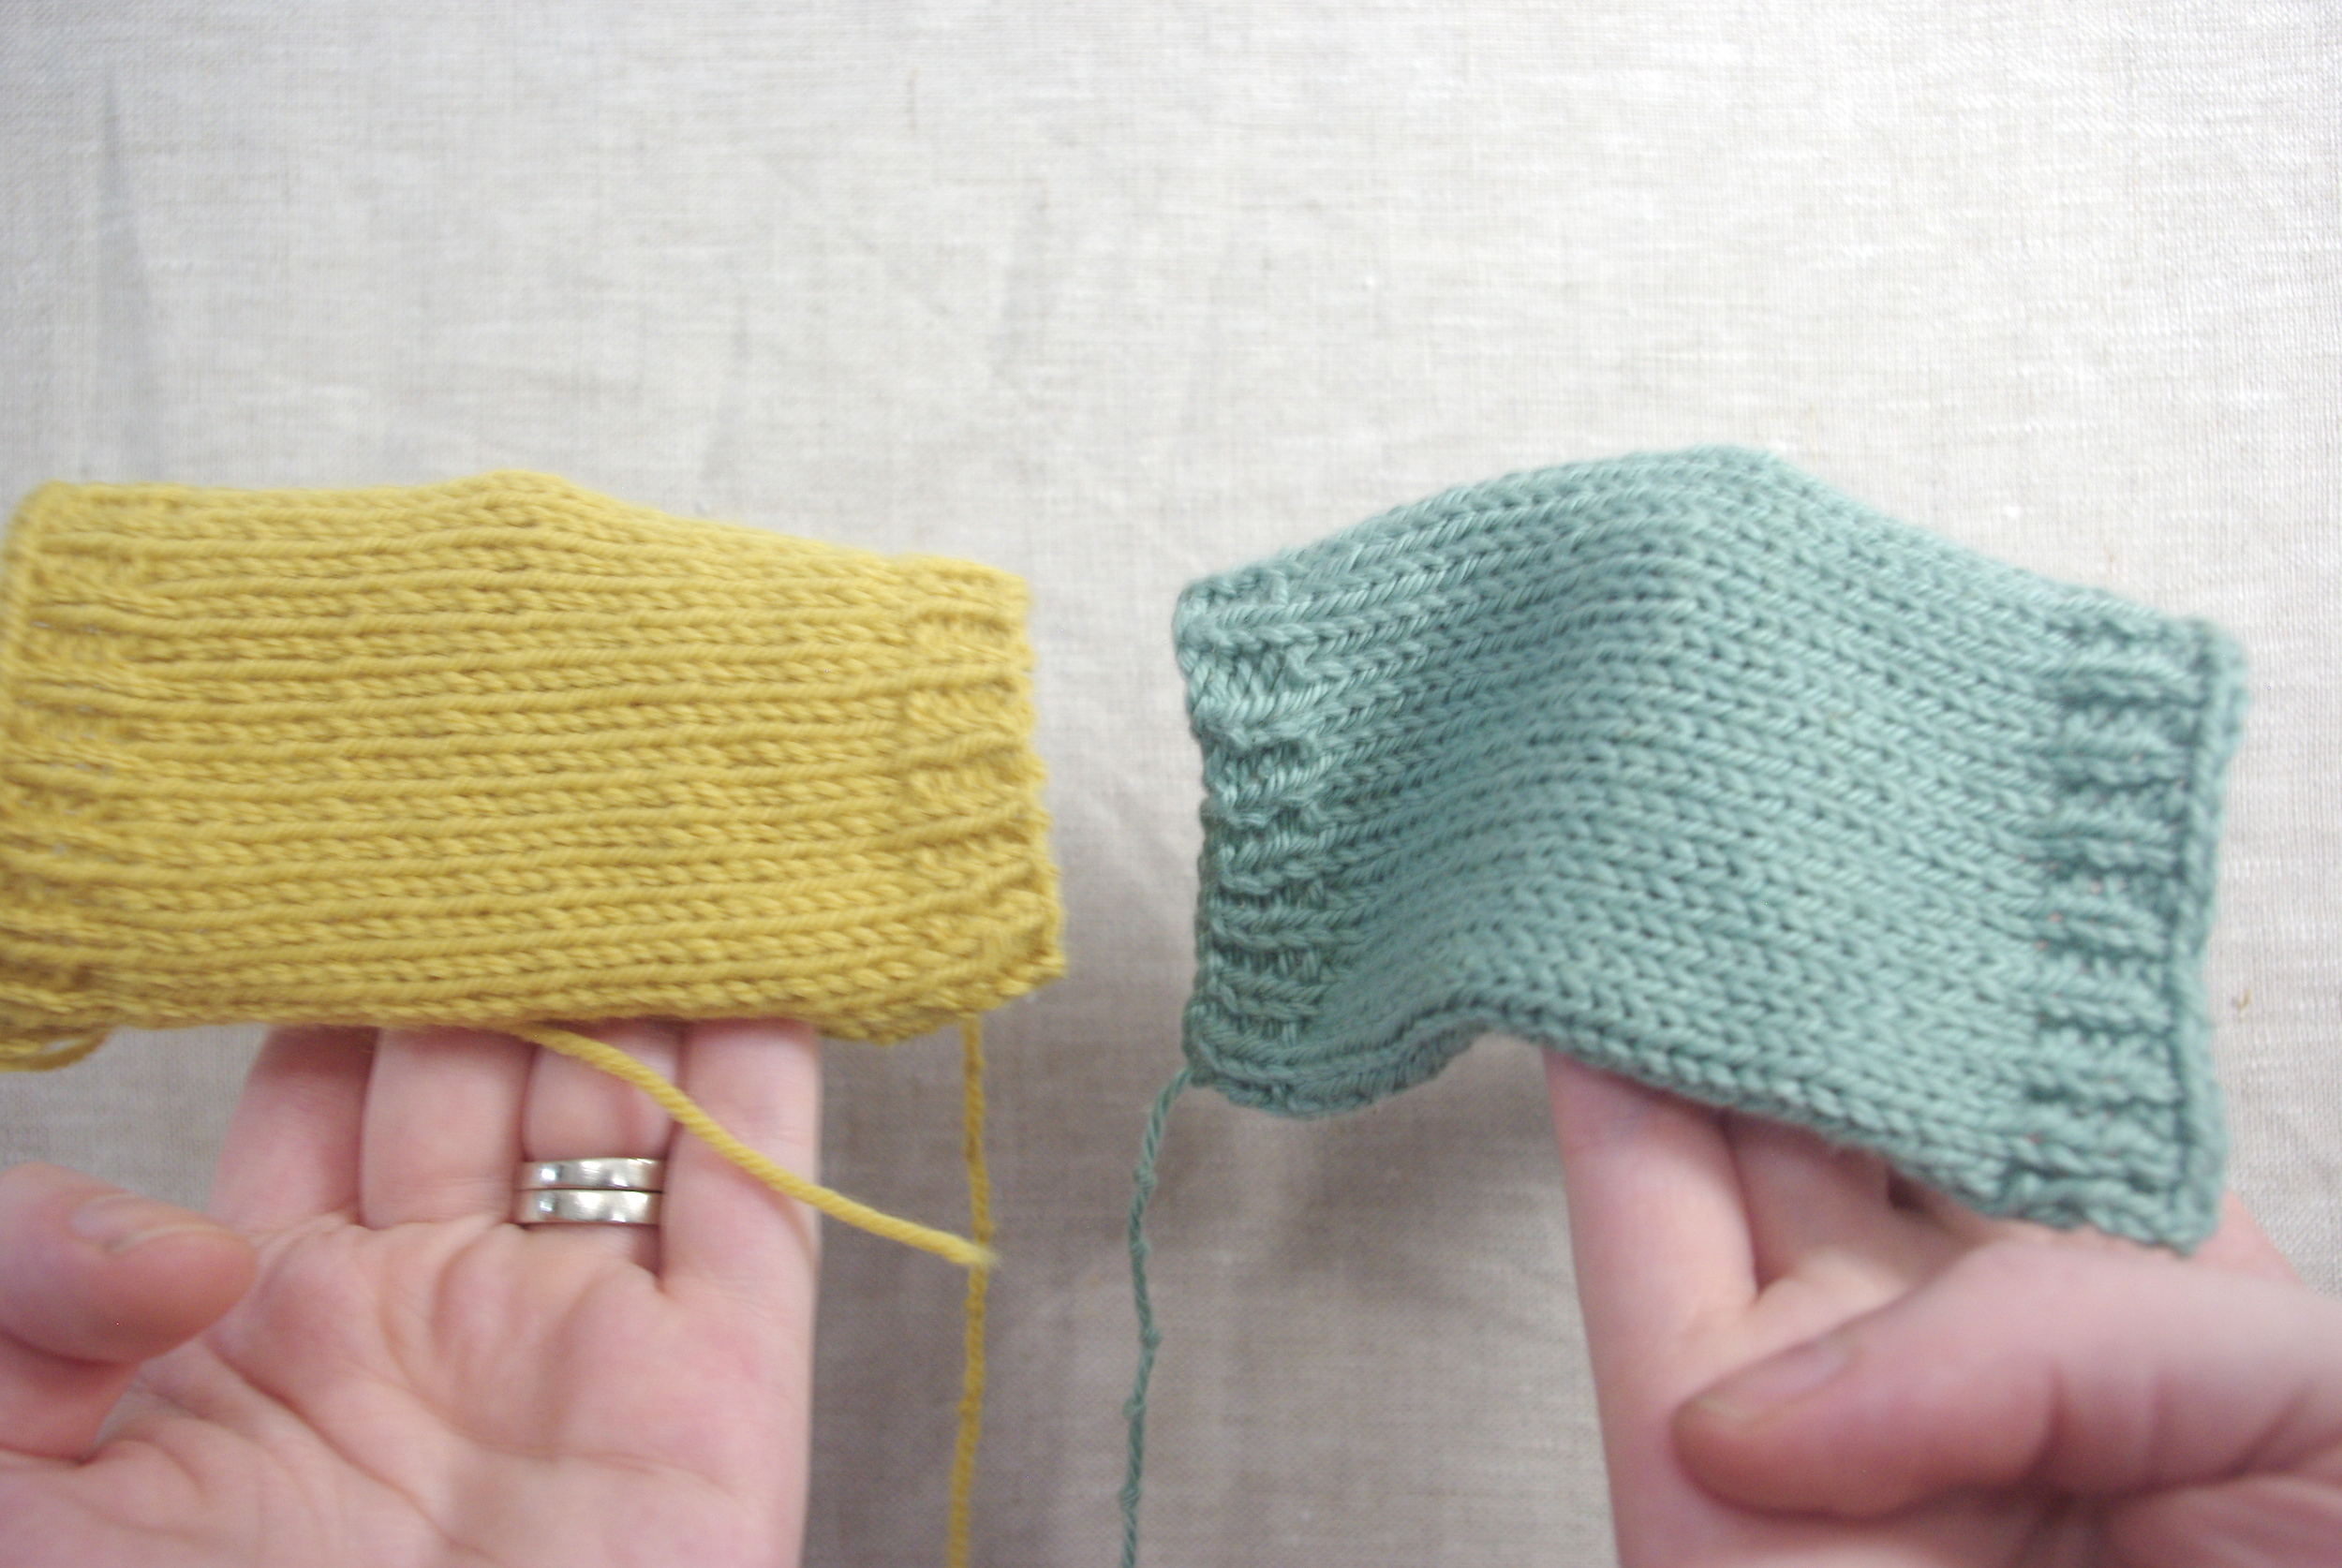 Knitting with Cotton, a tutorial — Ms. Cleaver - Creations for a